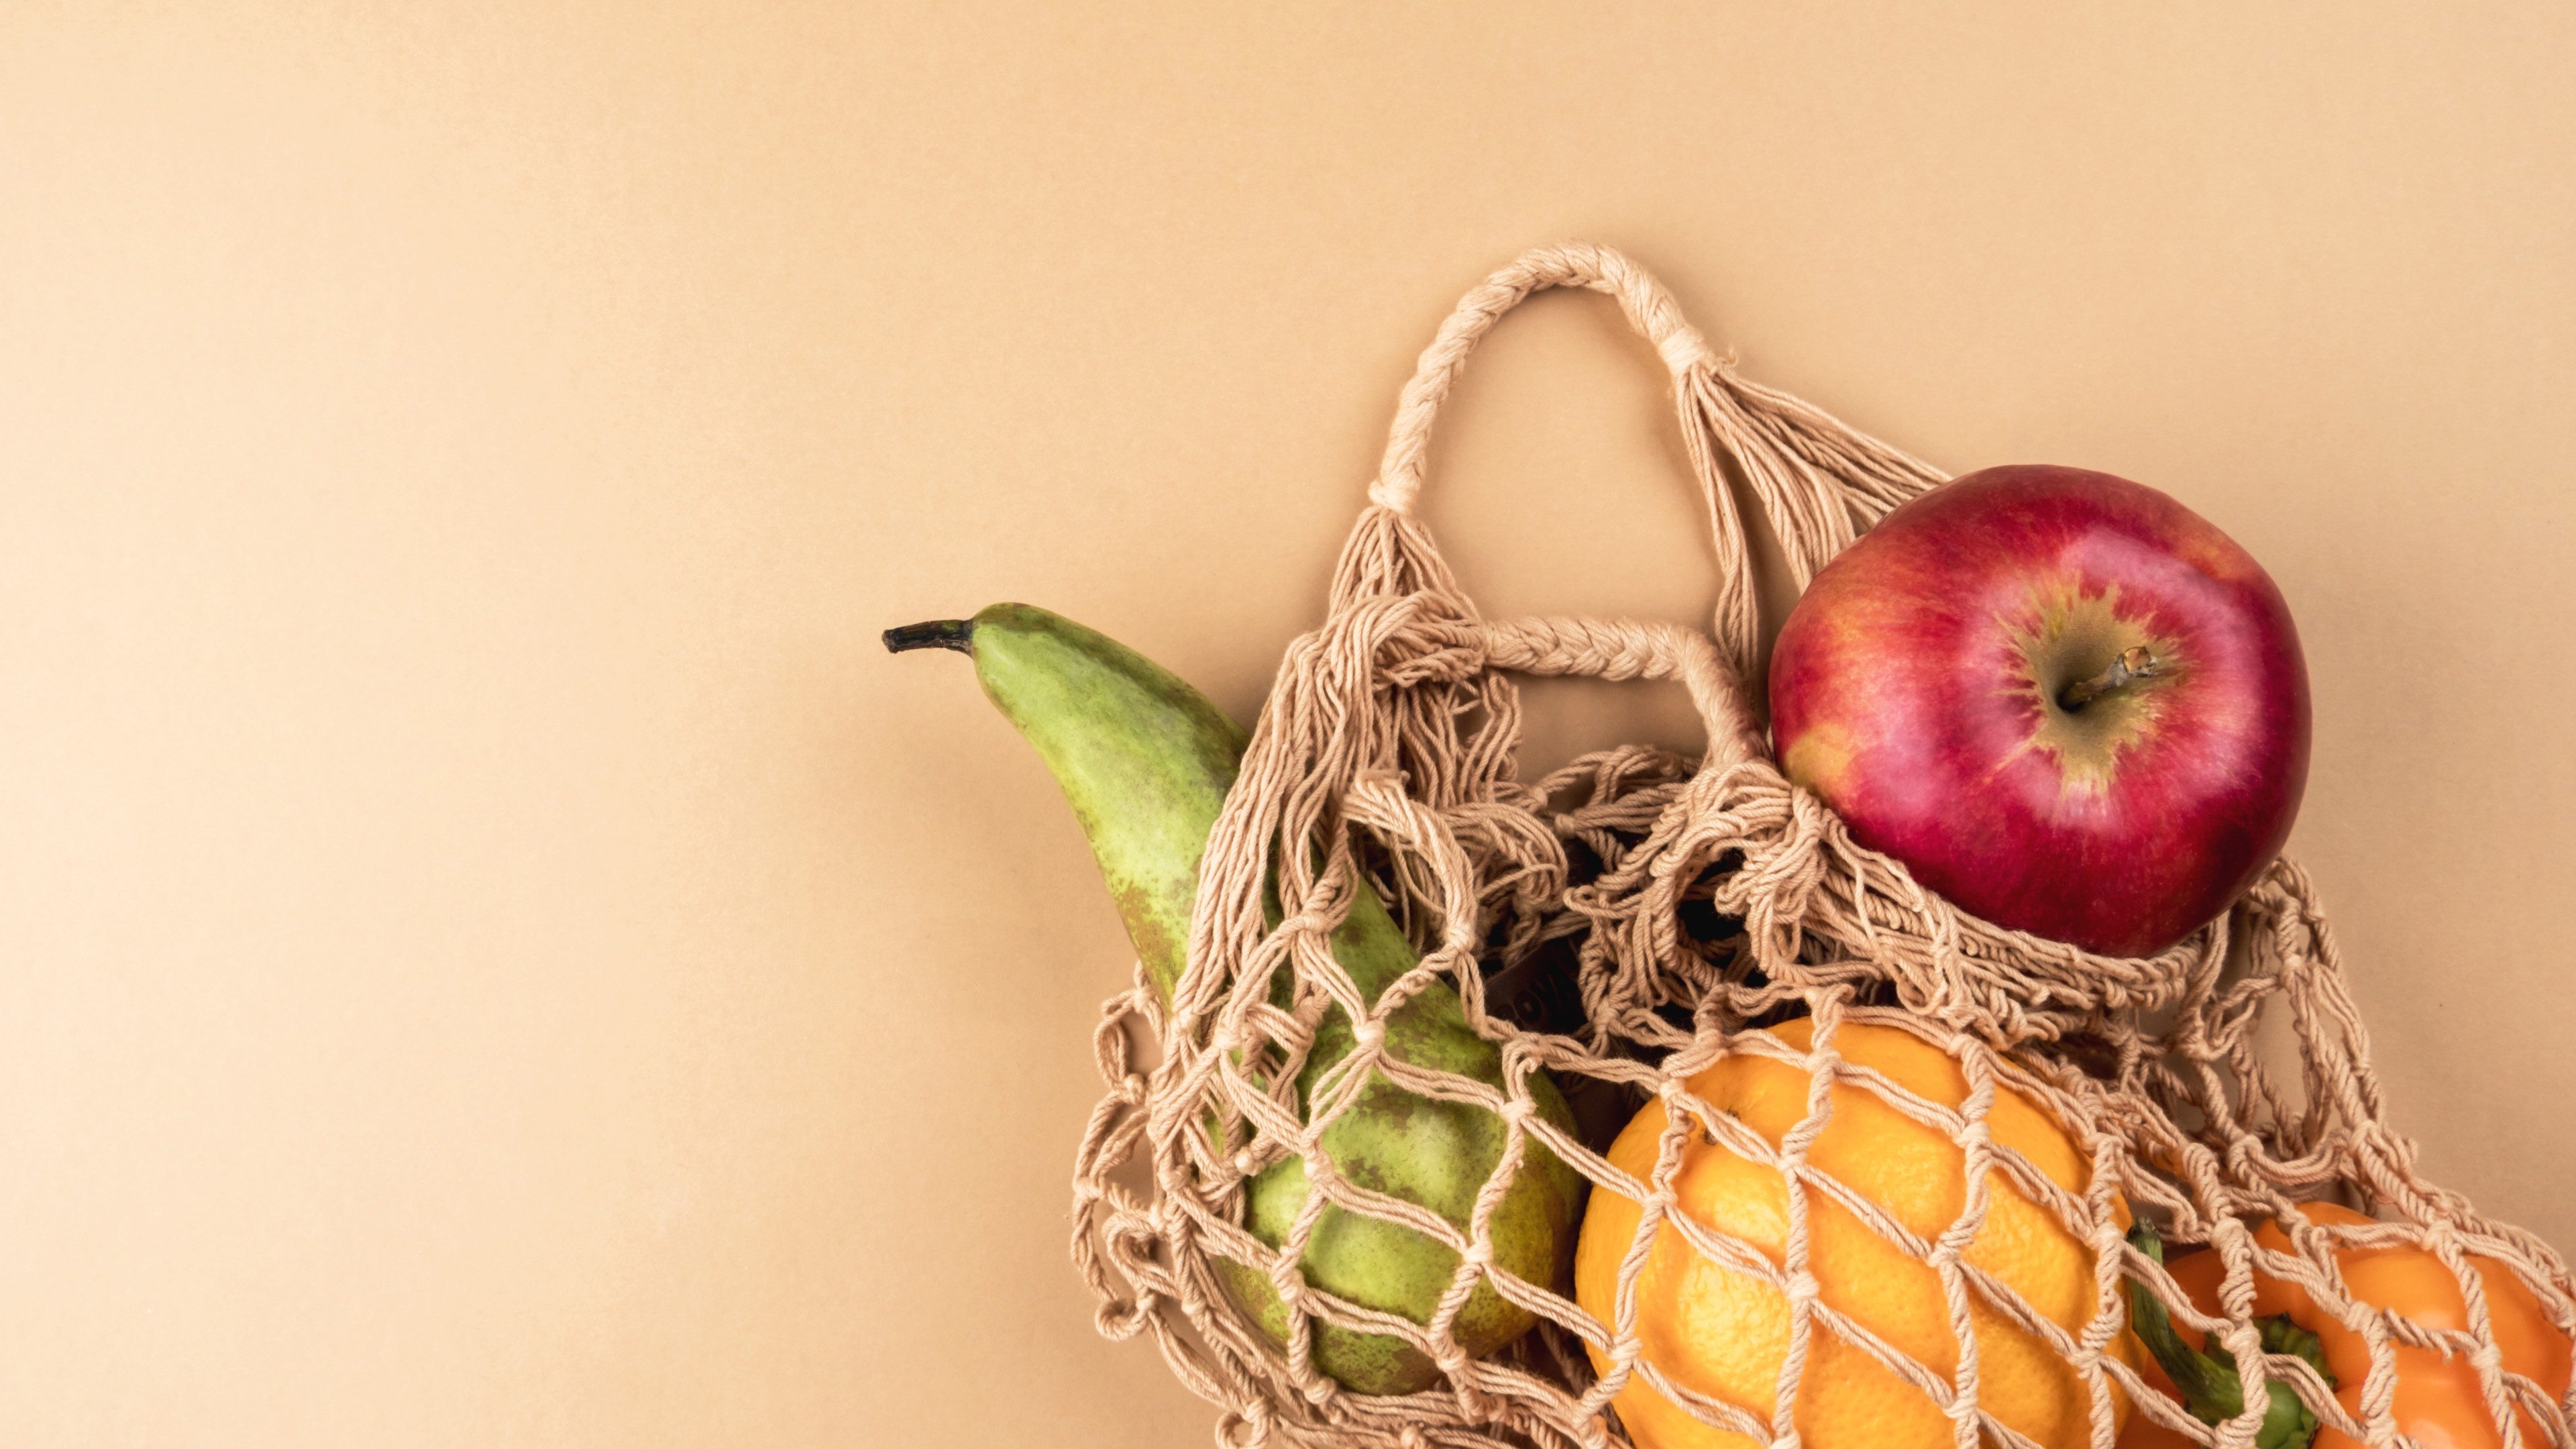 Fresh fruits and vegetables in a wicker eco-friendly bag on a beige background.  Zero waste